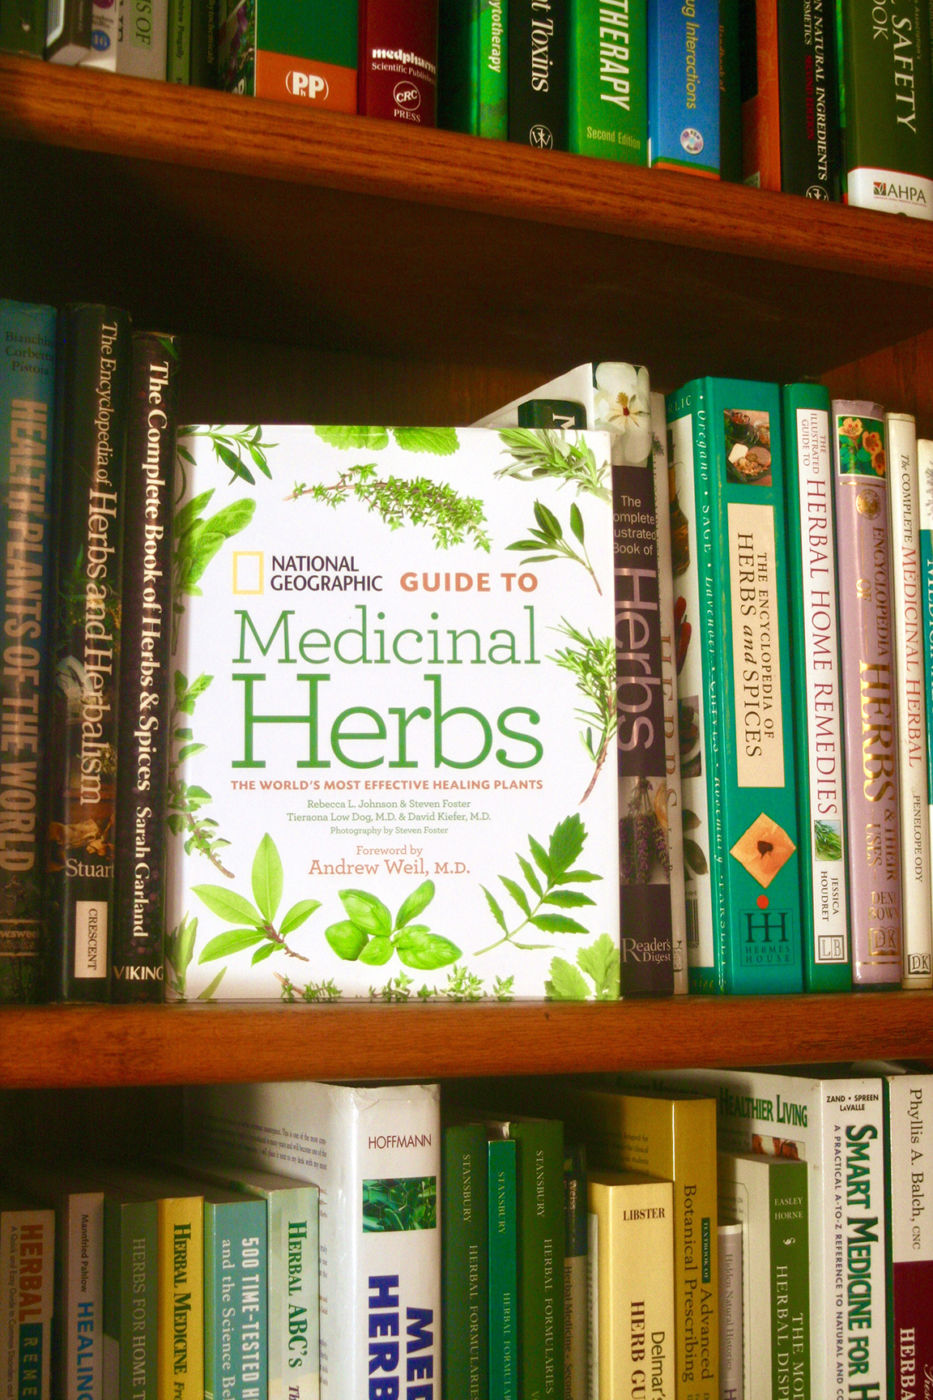 The Guide to Medicinal Herbs book sits on a bookshelf.